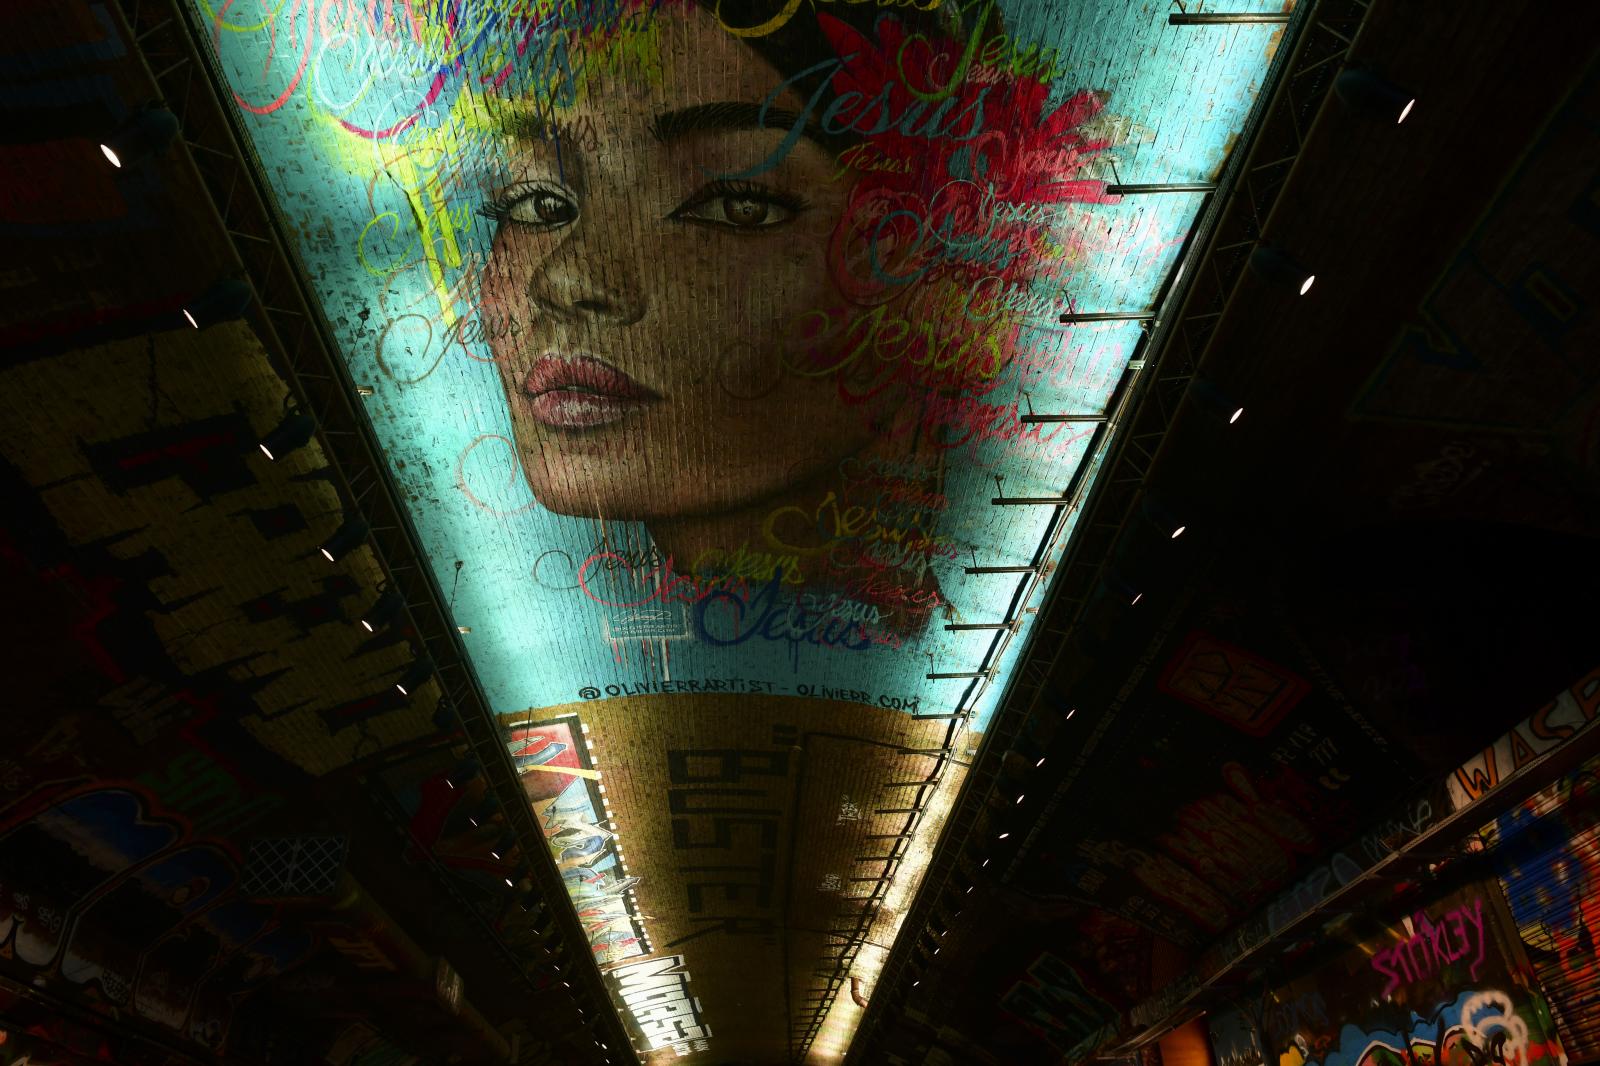 Image from Daily Life UK - Leake St Tunnel known as the Banksy Tunnel near the...